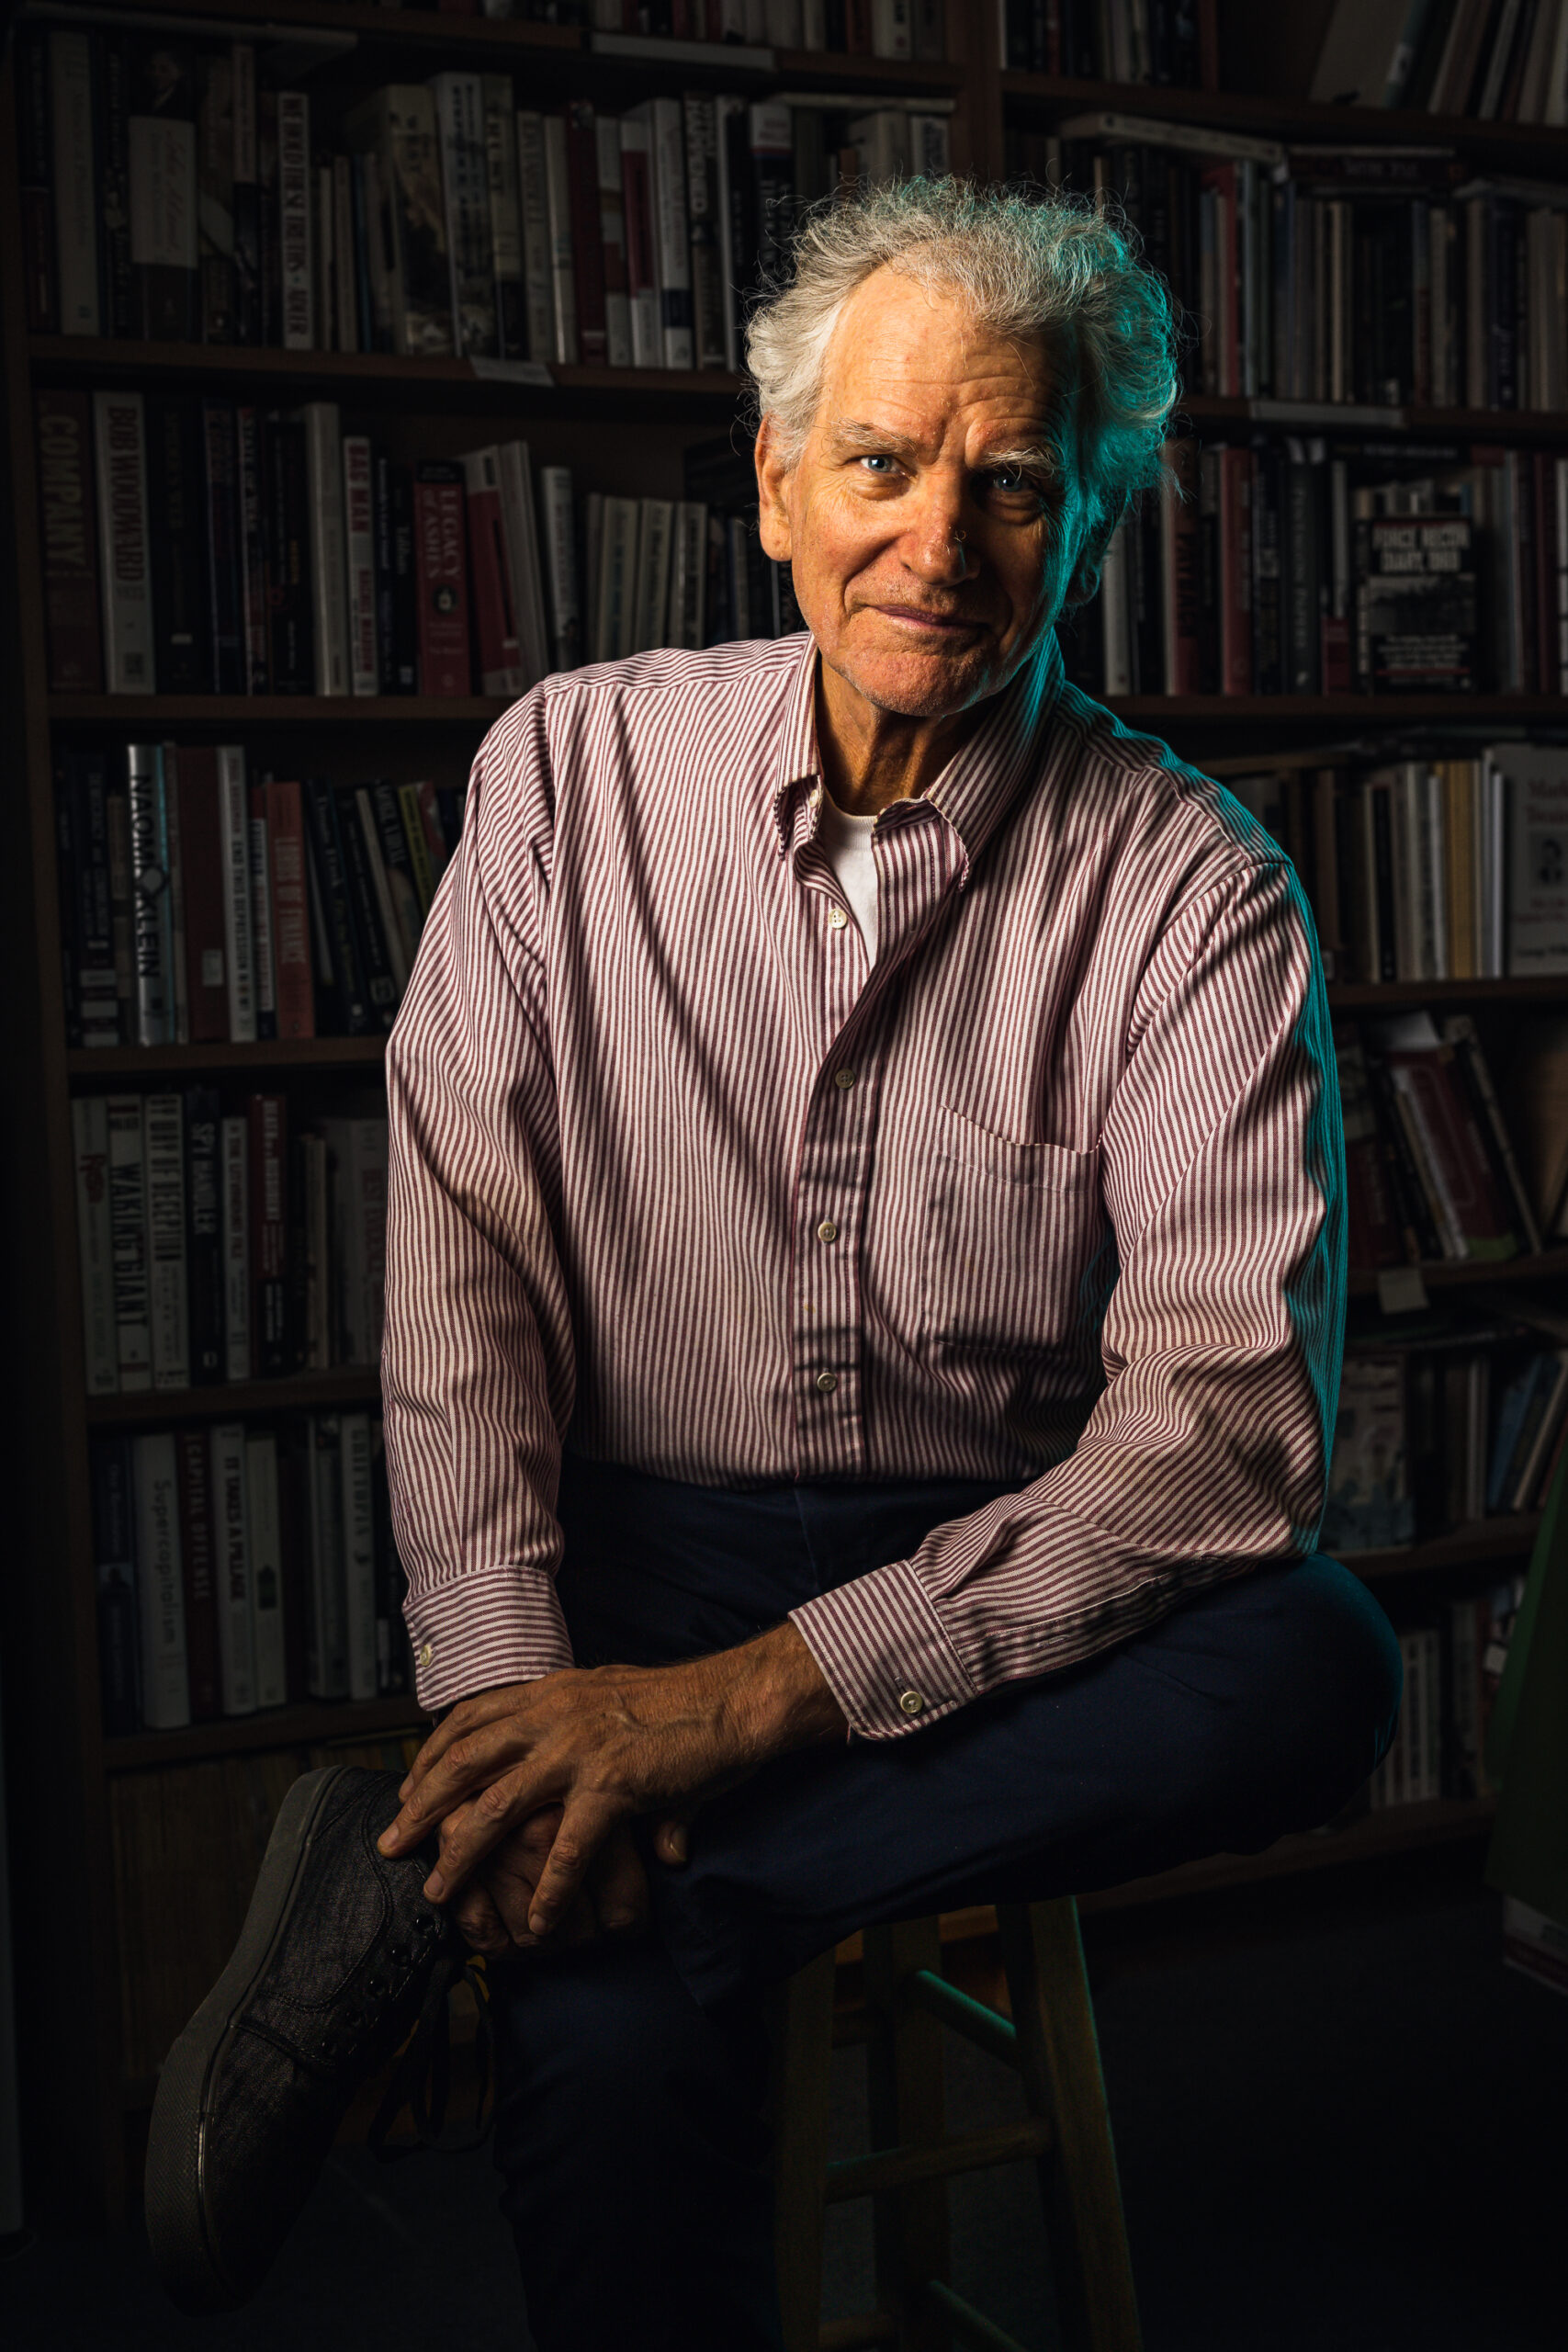 Older man in light colored collared shirt sits on a stool while leaning towards the camera while being illuminated on the left side by a warm light, and a cool turquoise light from the opposite side.